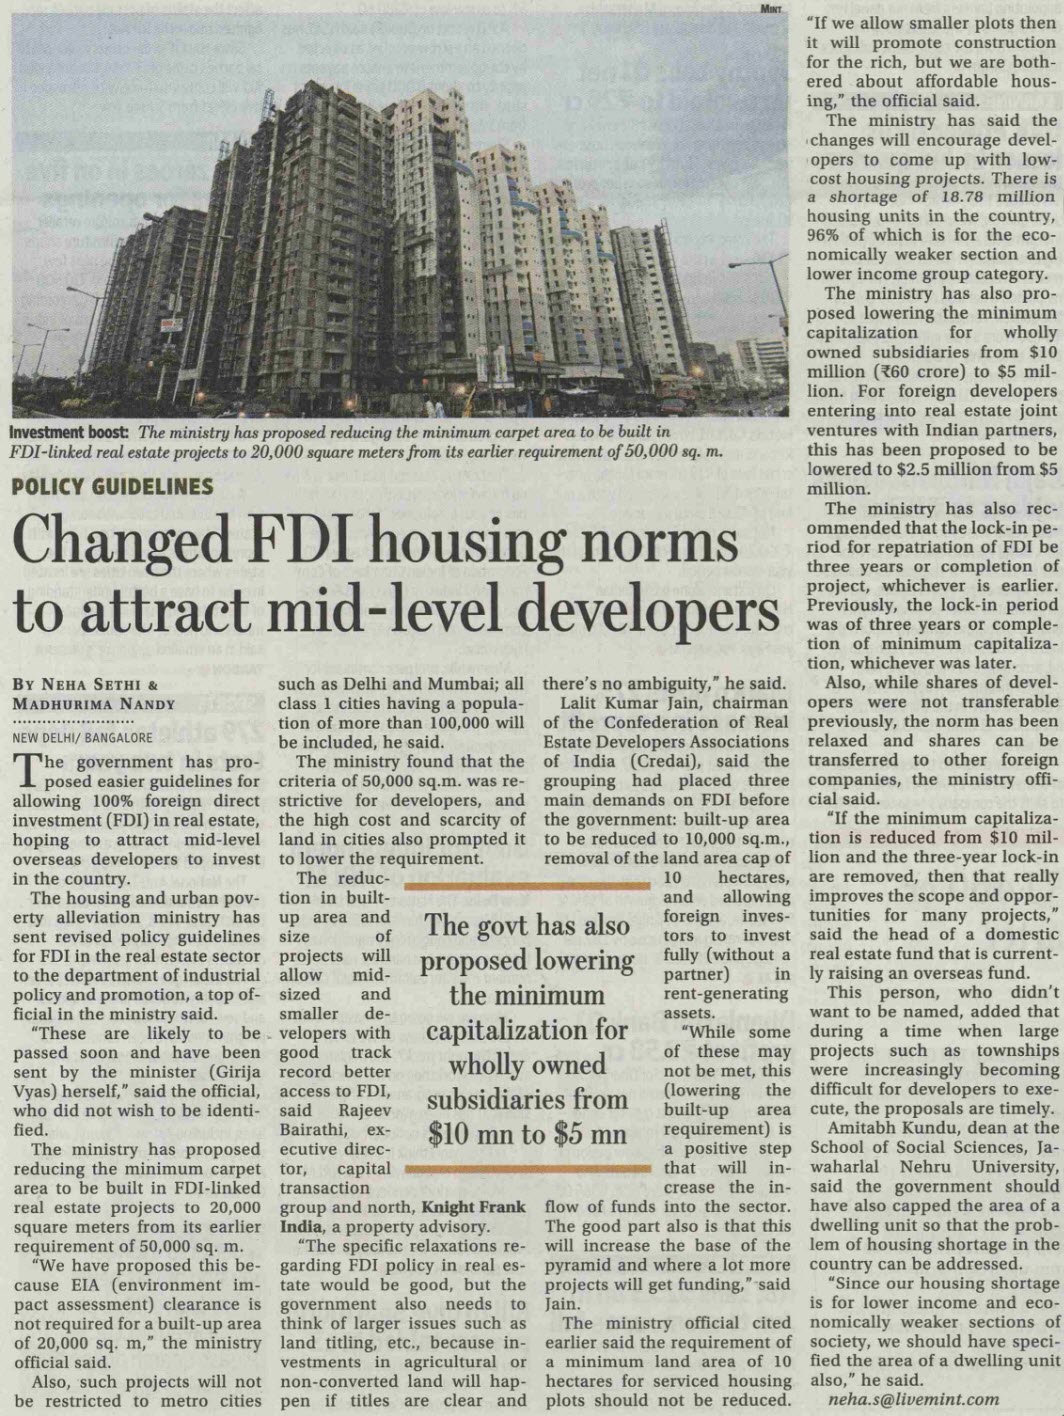 Changed FDI housing norms to attract mid-level developers